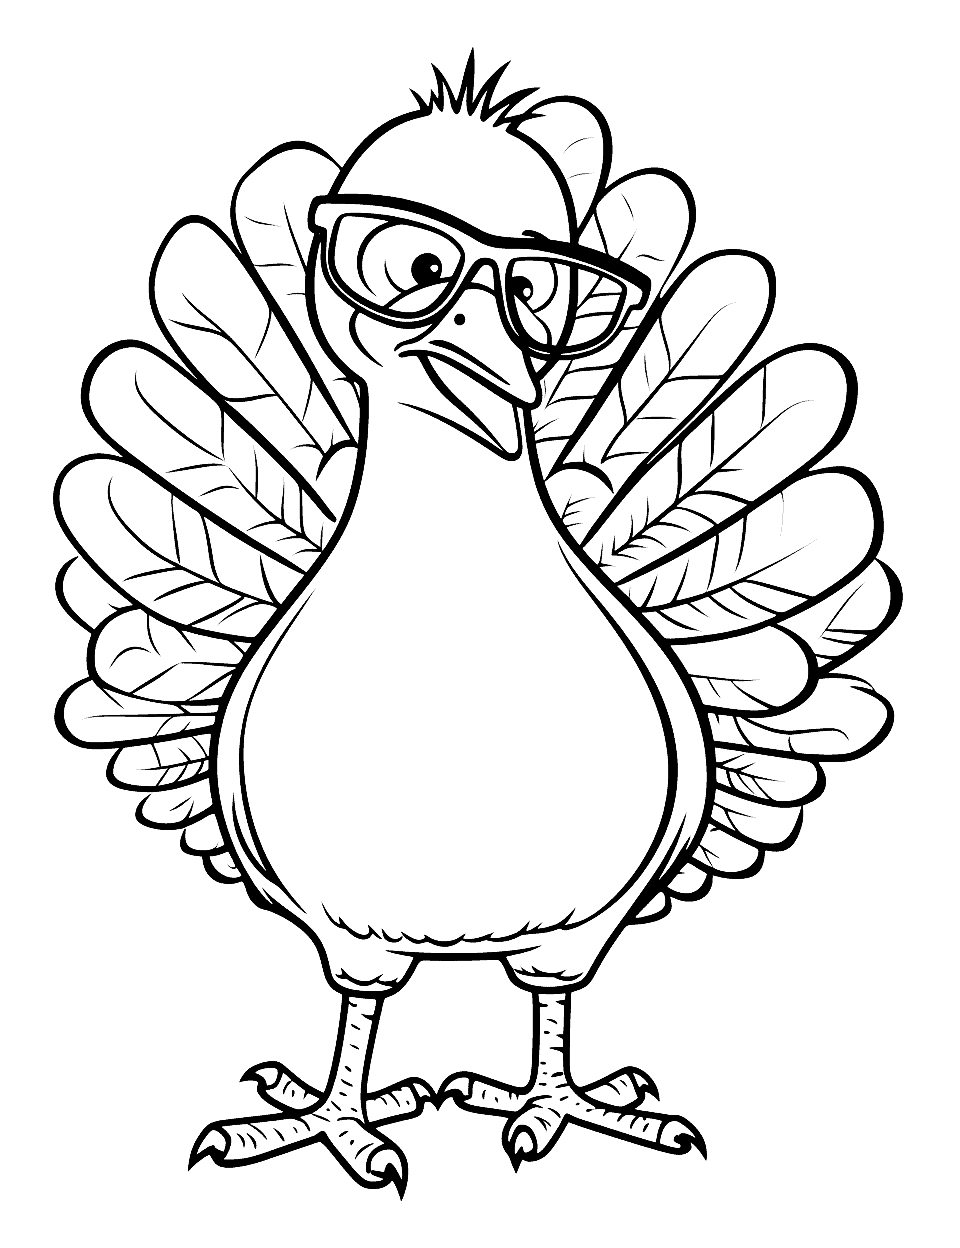 Cool Turkey Wearing Sunglasses Coloring Page - A turkey wearing sunglasses making for a cool coloring image for kids.